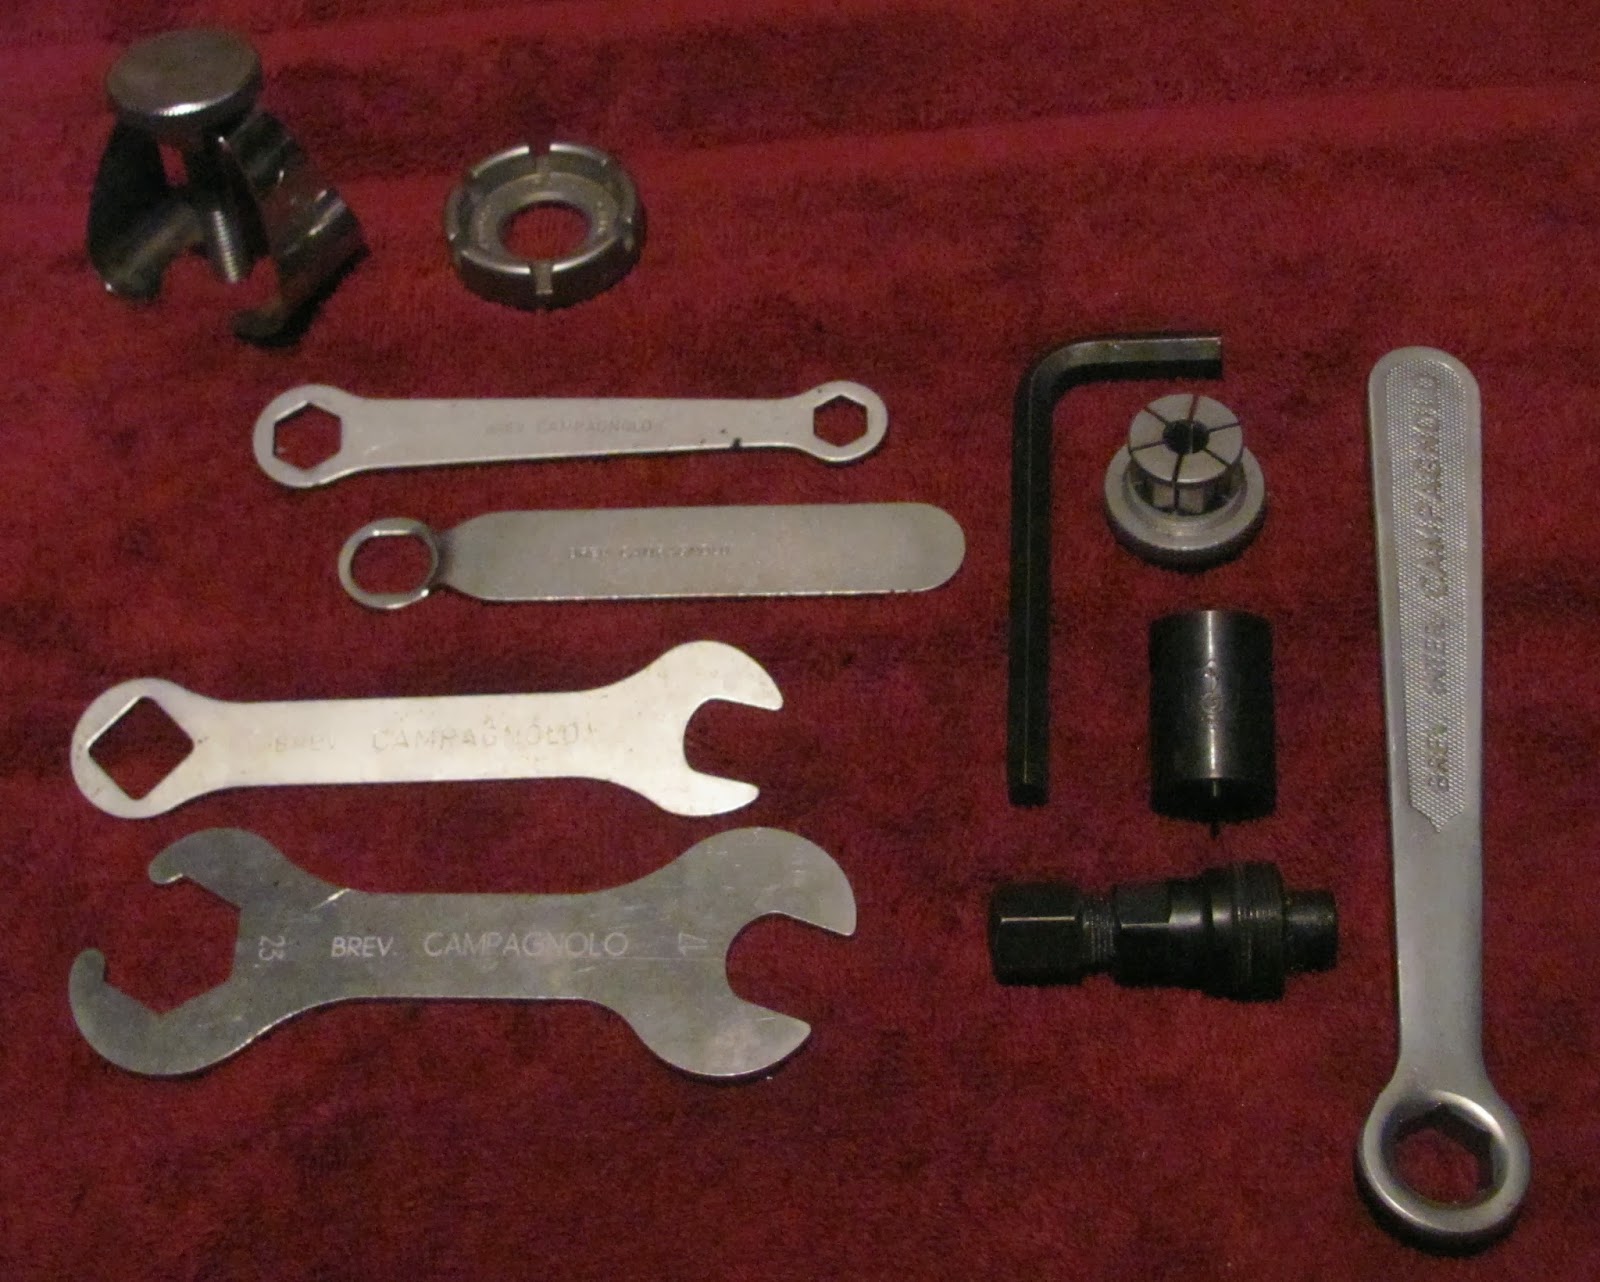 Campagnolo Tool # Ut-vs100 T Spanner Male M6 With 8mm Sucket Head for sale online 